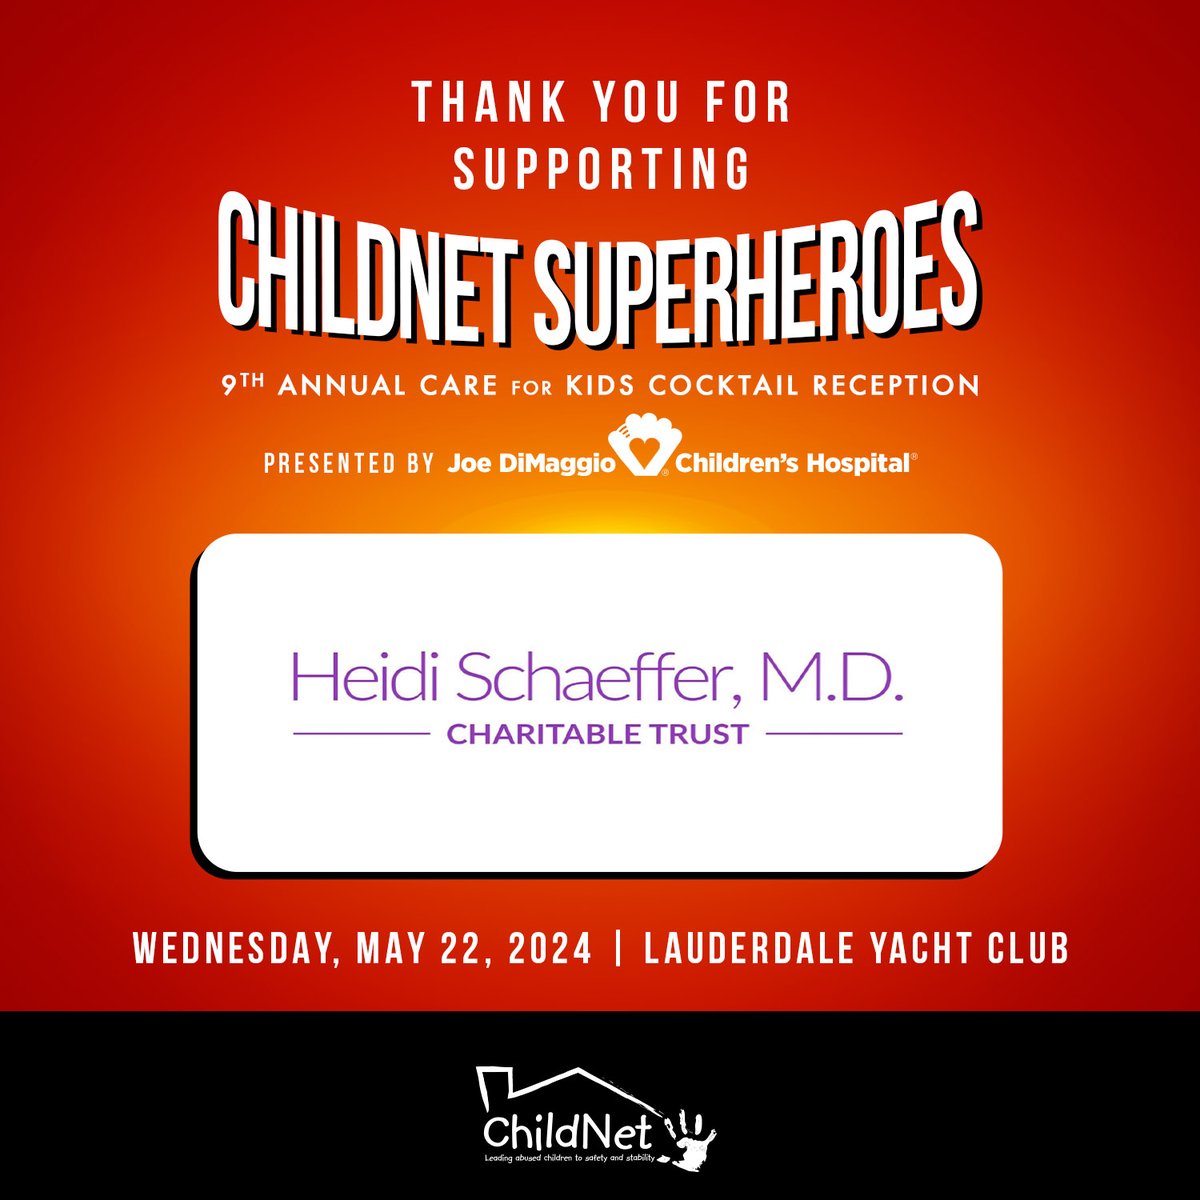 Thank you Heidi Schaeffer for becoming a sponsor of the 9th Annual Care for Kids Cocktail Reception!